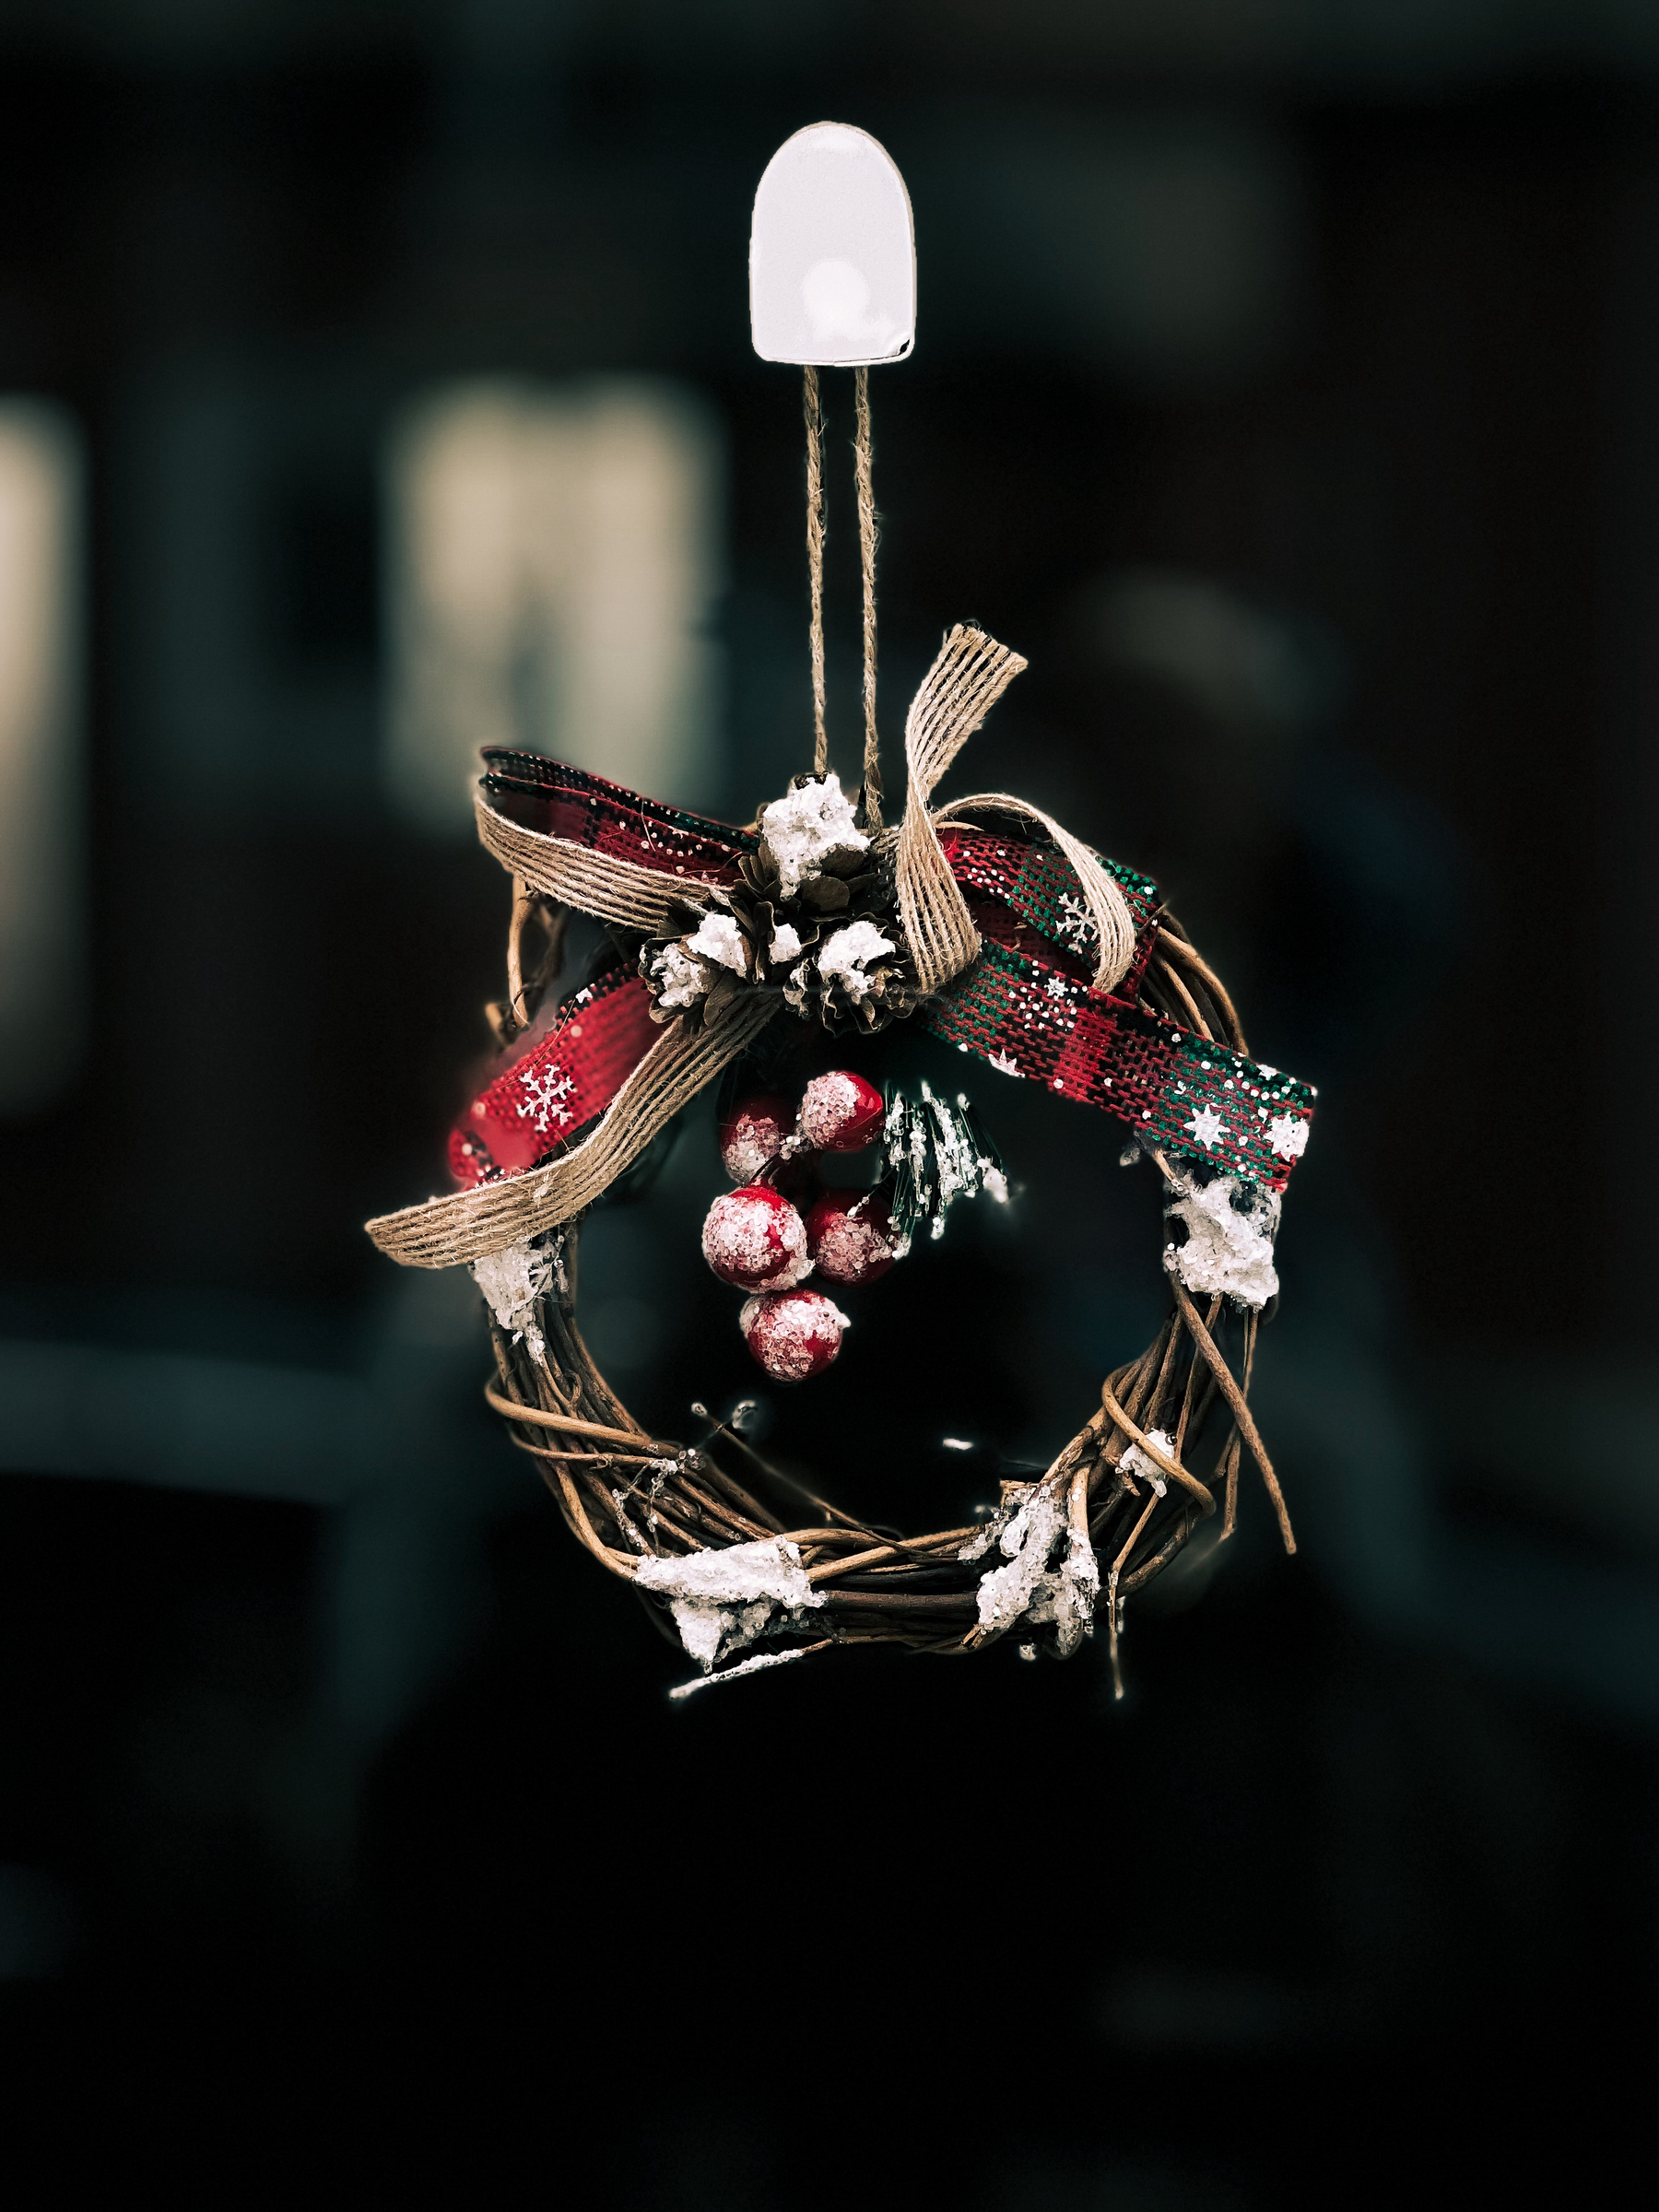 A festive Christmas wreath with red and tartan ribbons, frosted pine cones, and red berries, hanging by a twine loop with a blurred background.